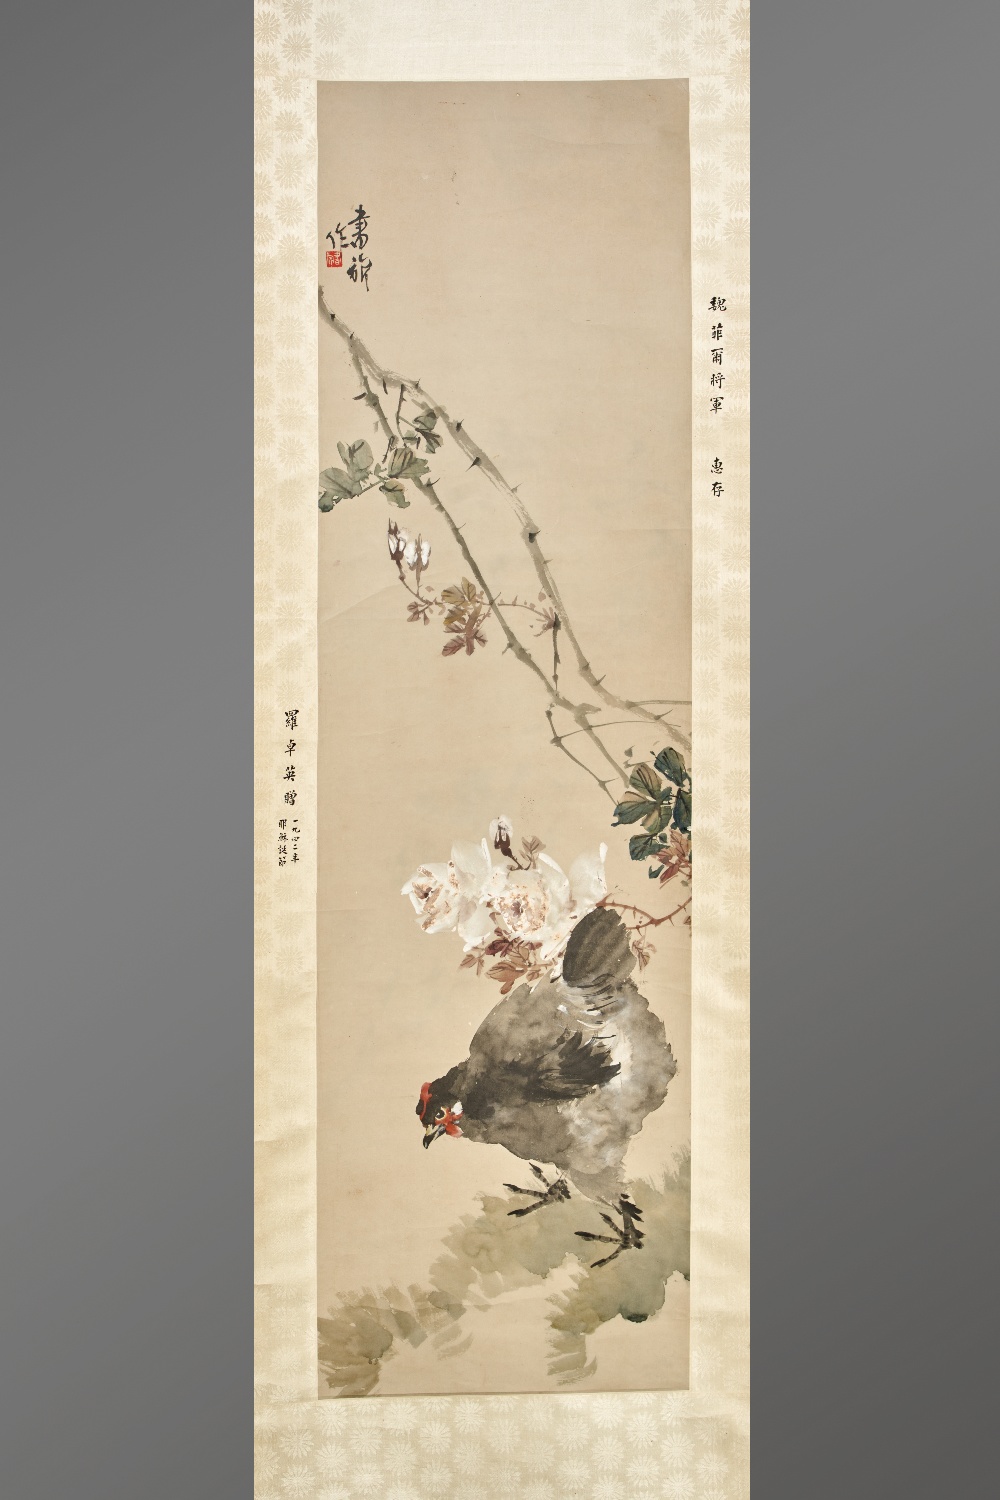 ZHANG SHUQI (1900-1957) A BLACK HEN AMIDST FLOWERS A Chinese scroll painting, ink and colour on